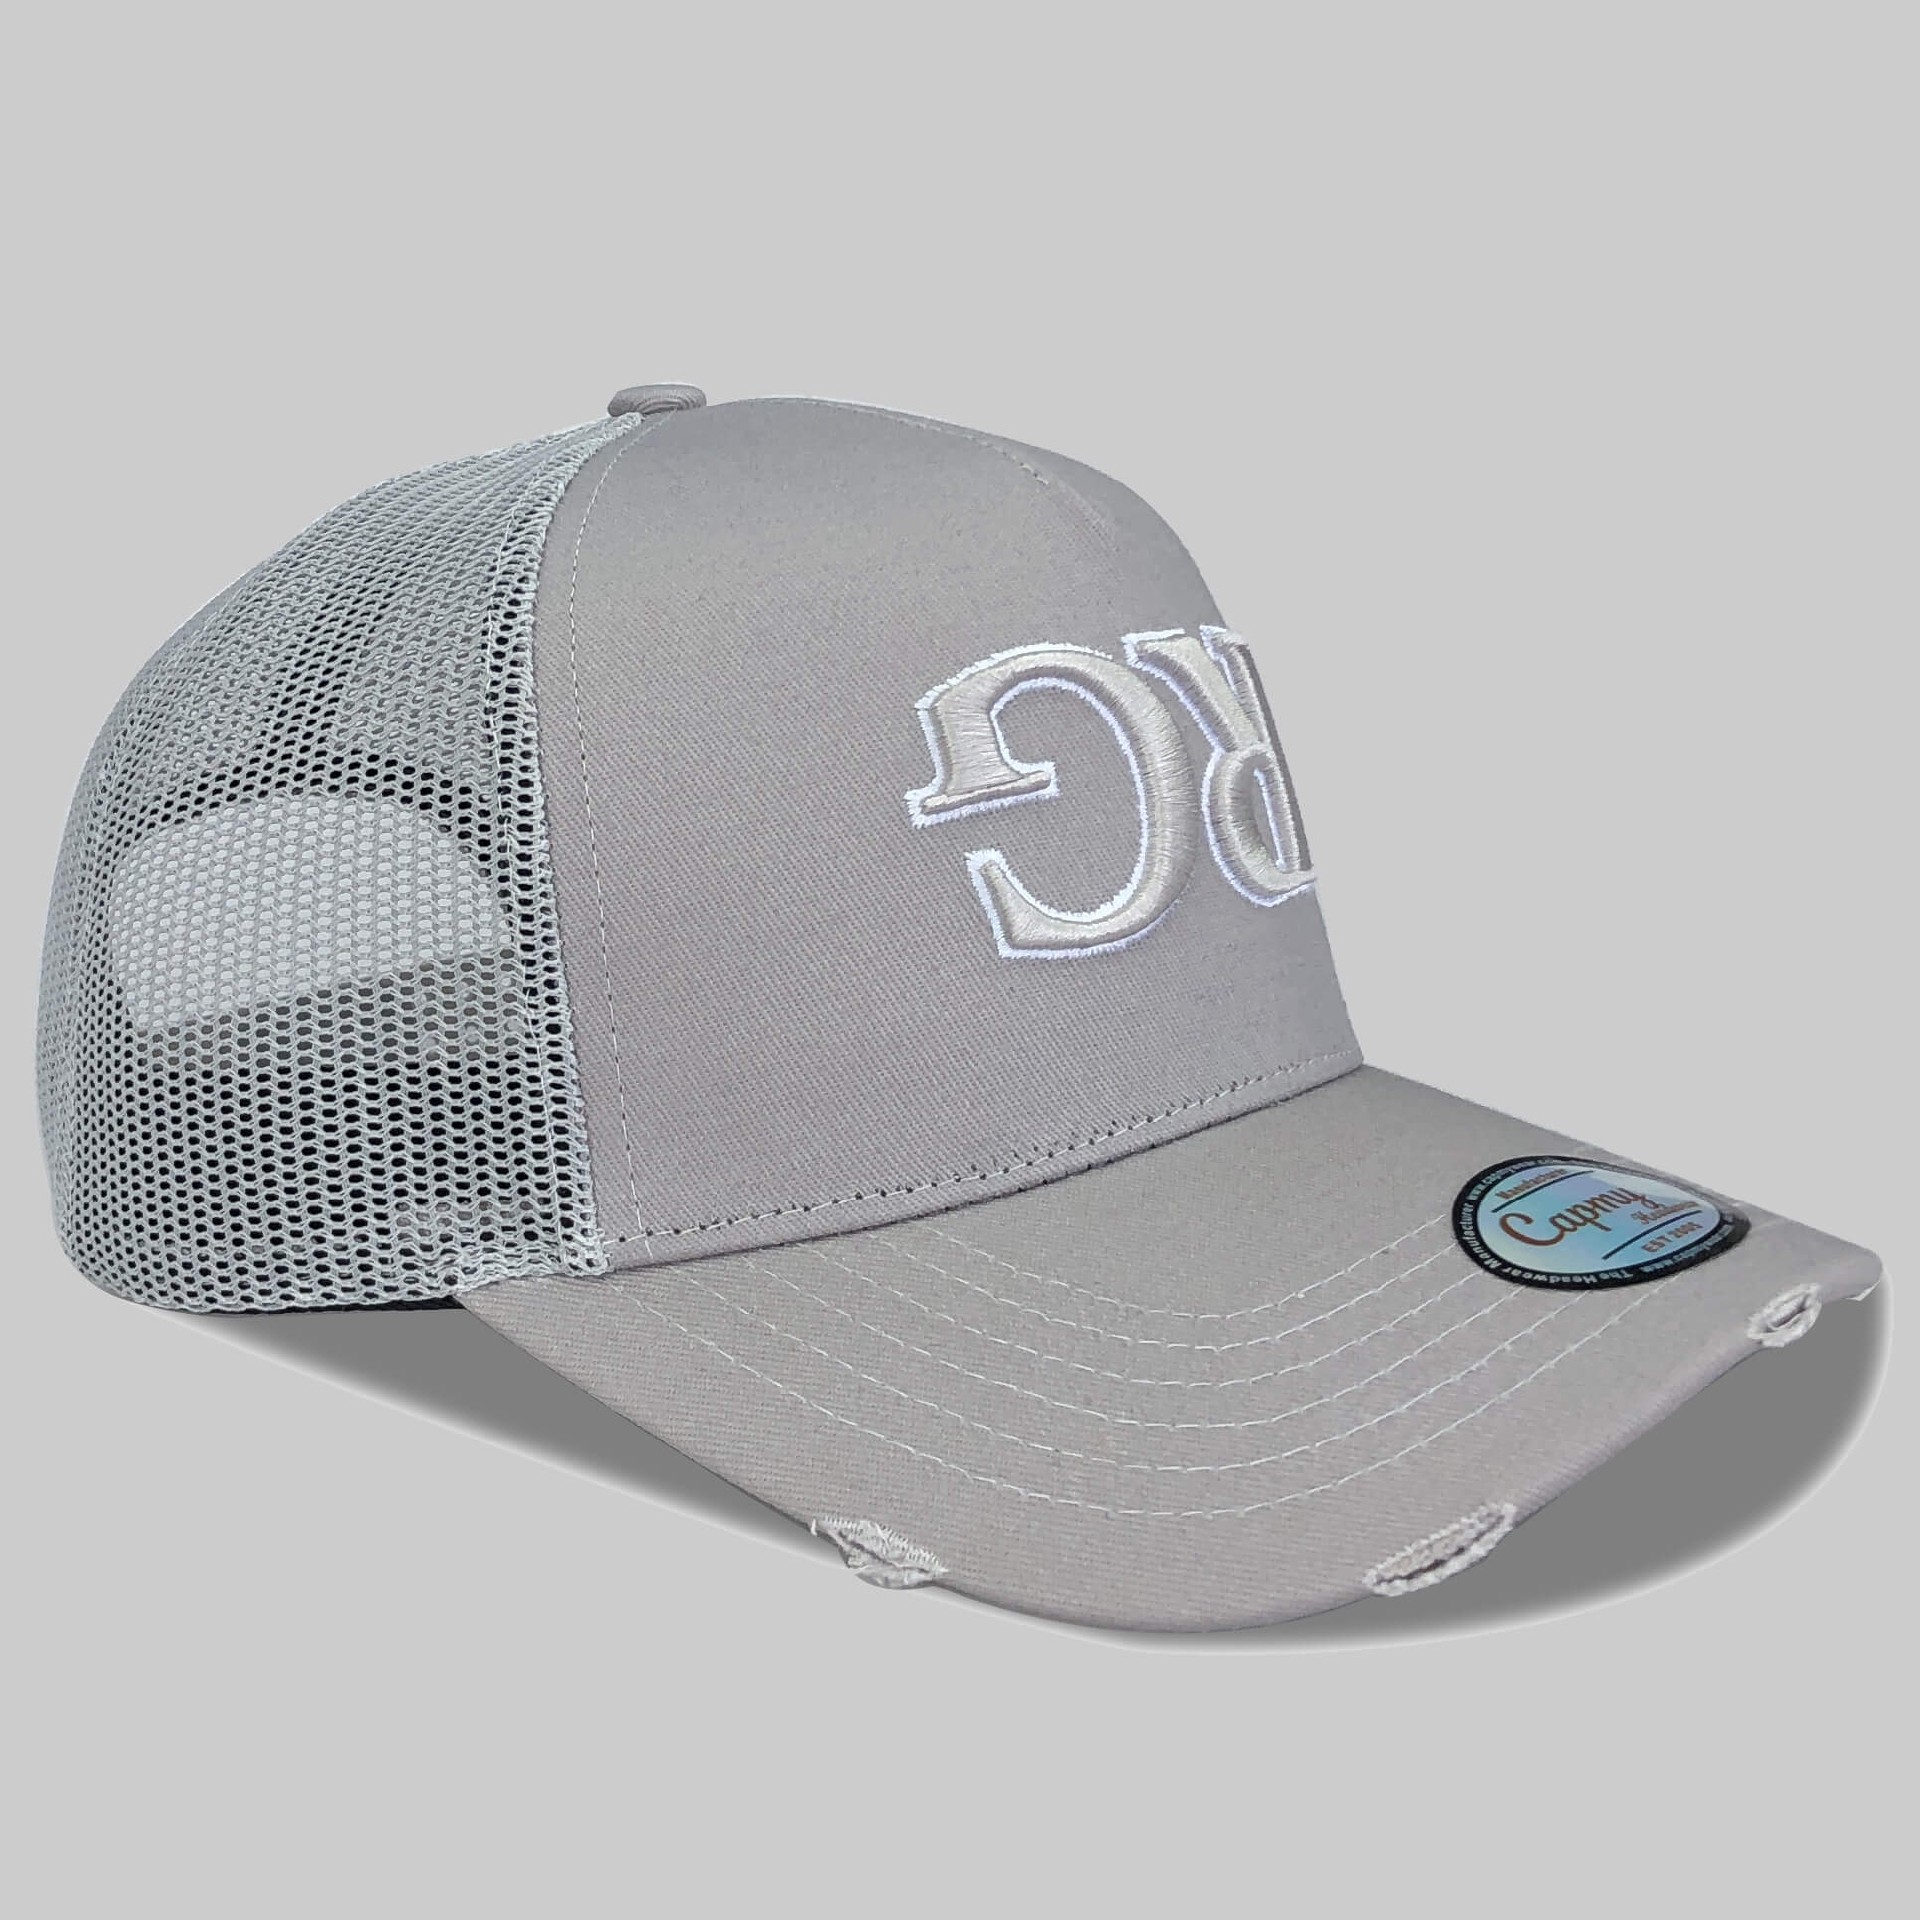 CMC-3132(Yelir Shape High Quality 5 Panel Structured Mesh Distressed Vintage Rip Blue Trucker Hat Factory)